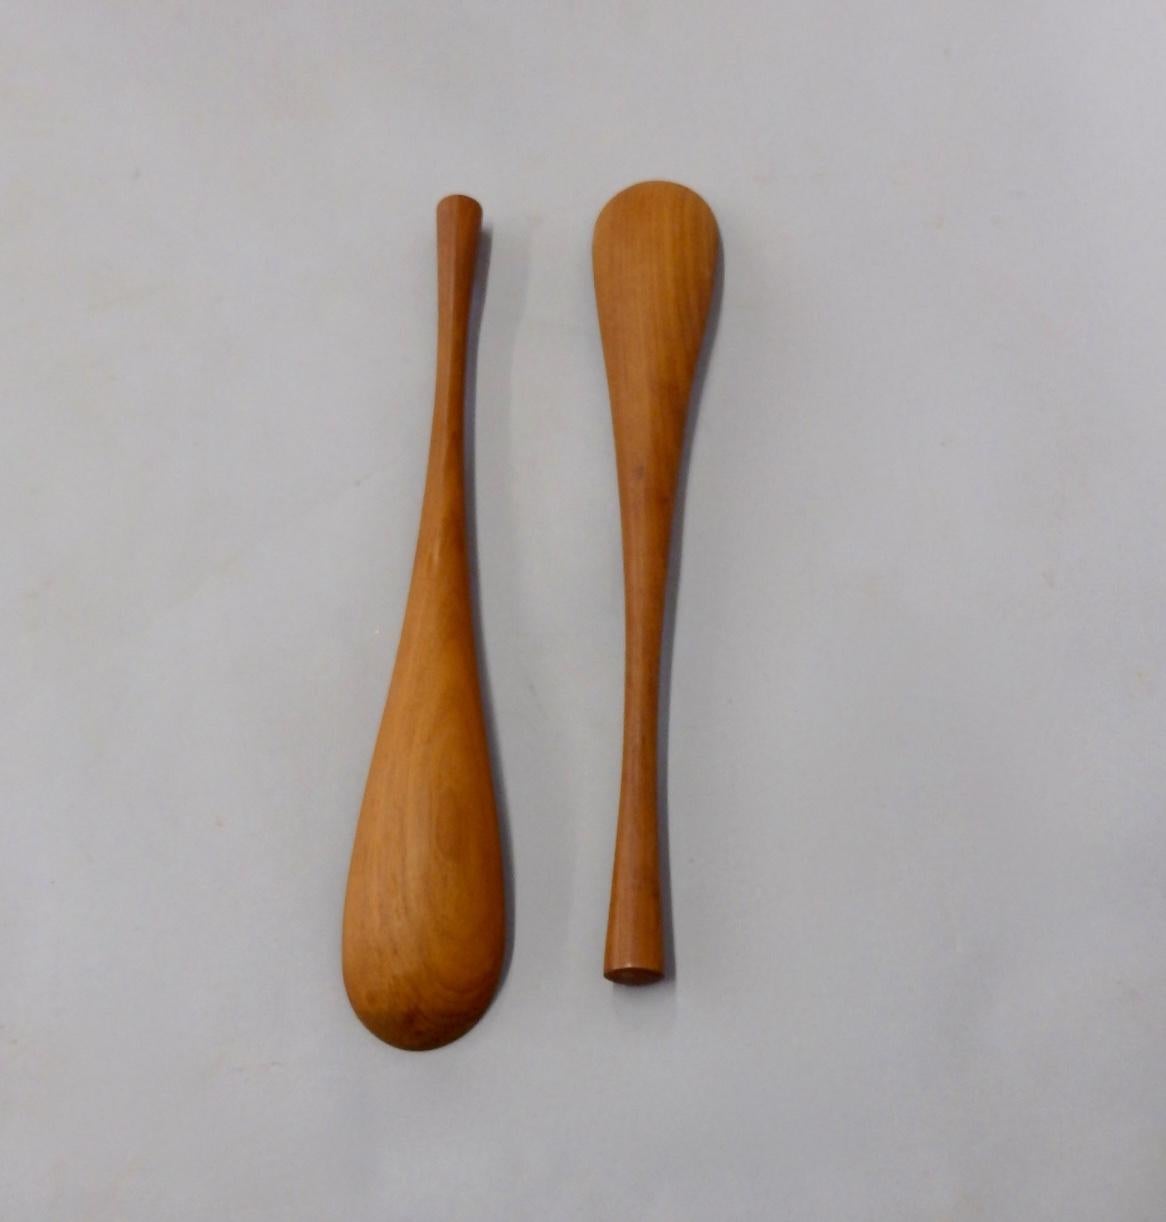 Pair of Jens Quistgaard Danish teak salad servers. Part of a recently acquired large collection.